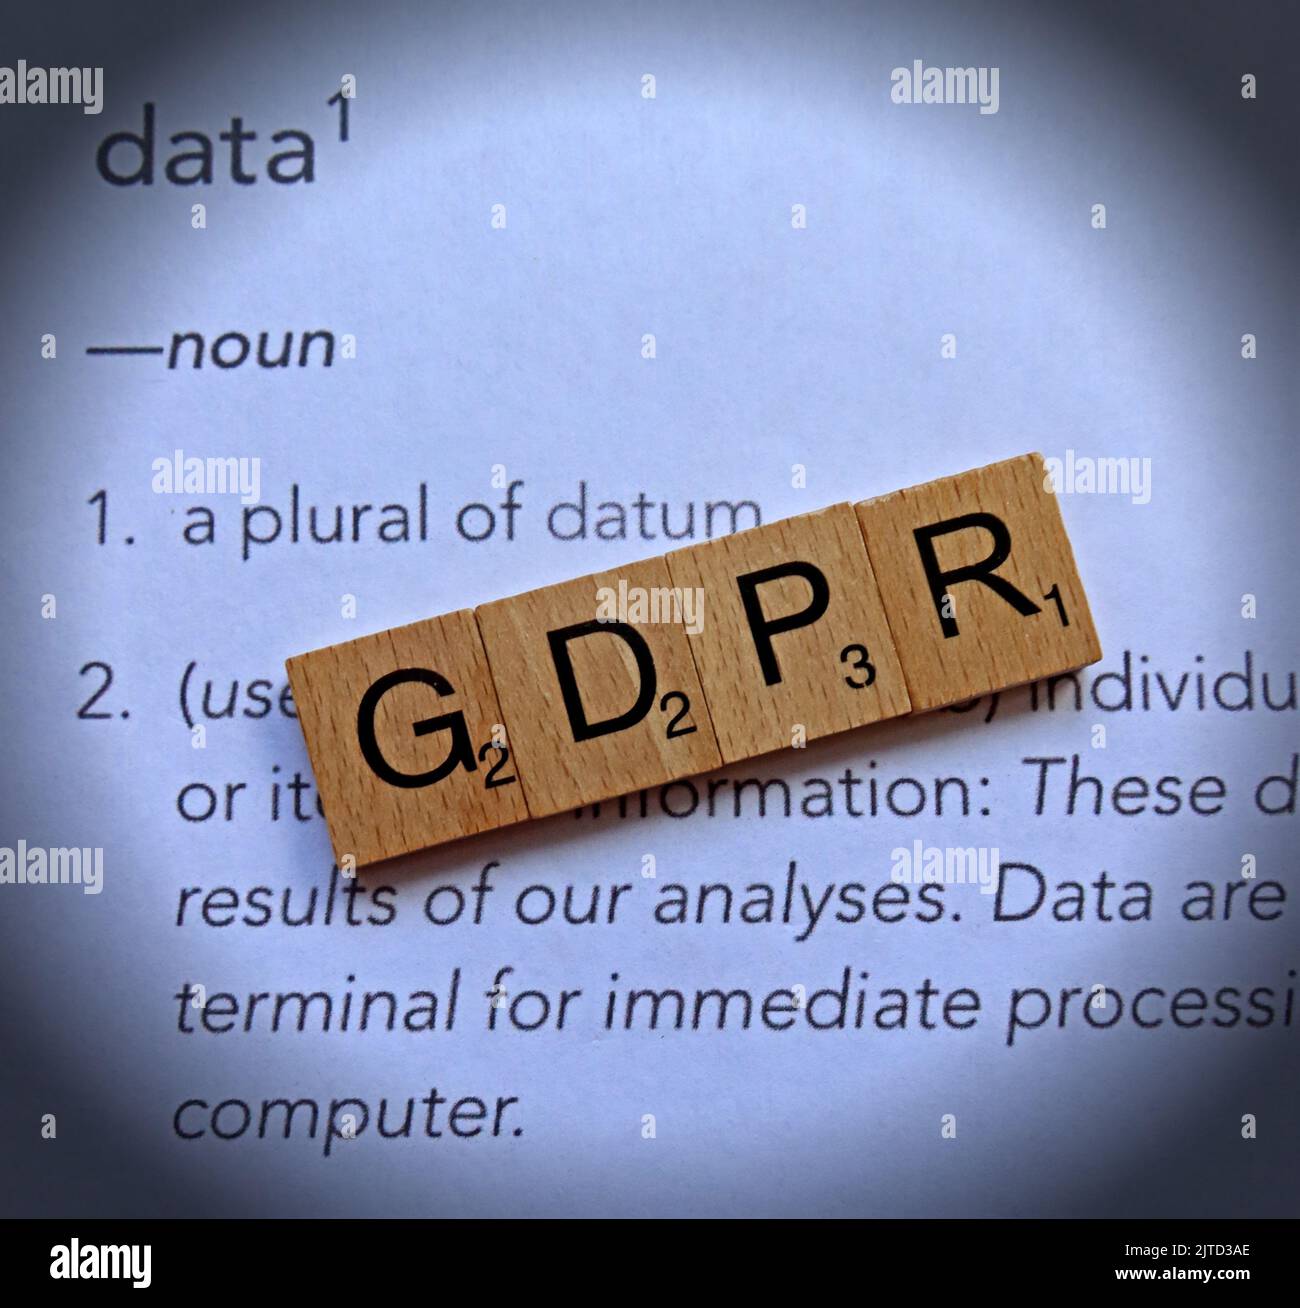 GDPR security & Data quality, spelled out in Scrabble letters Stock Photo